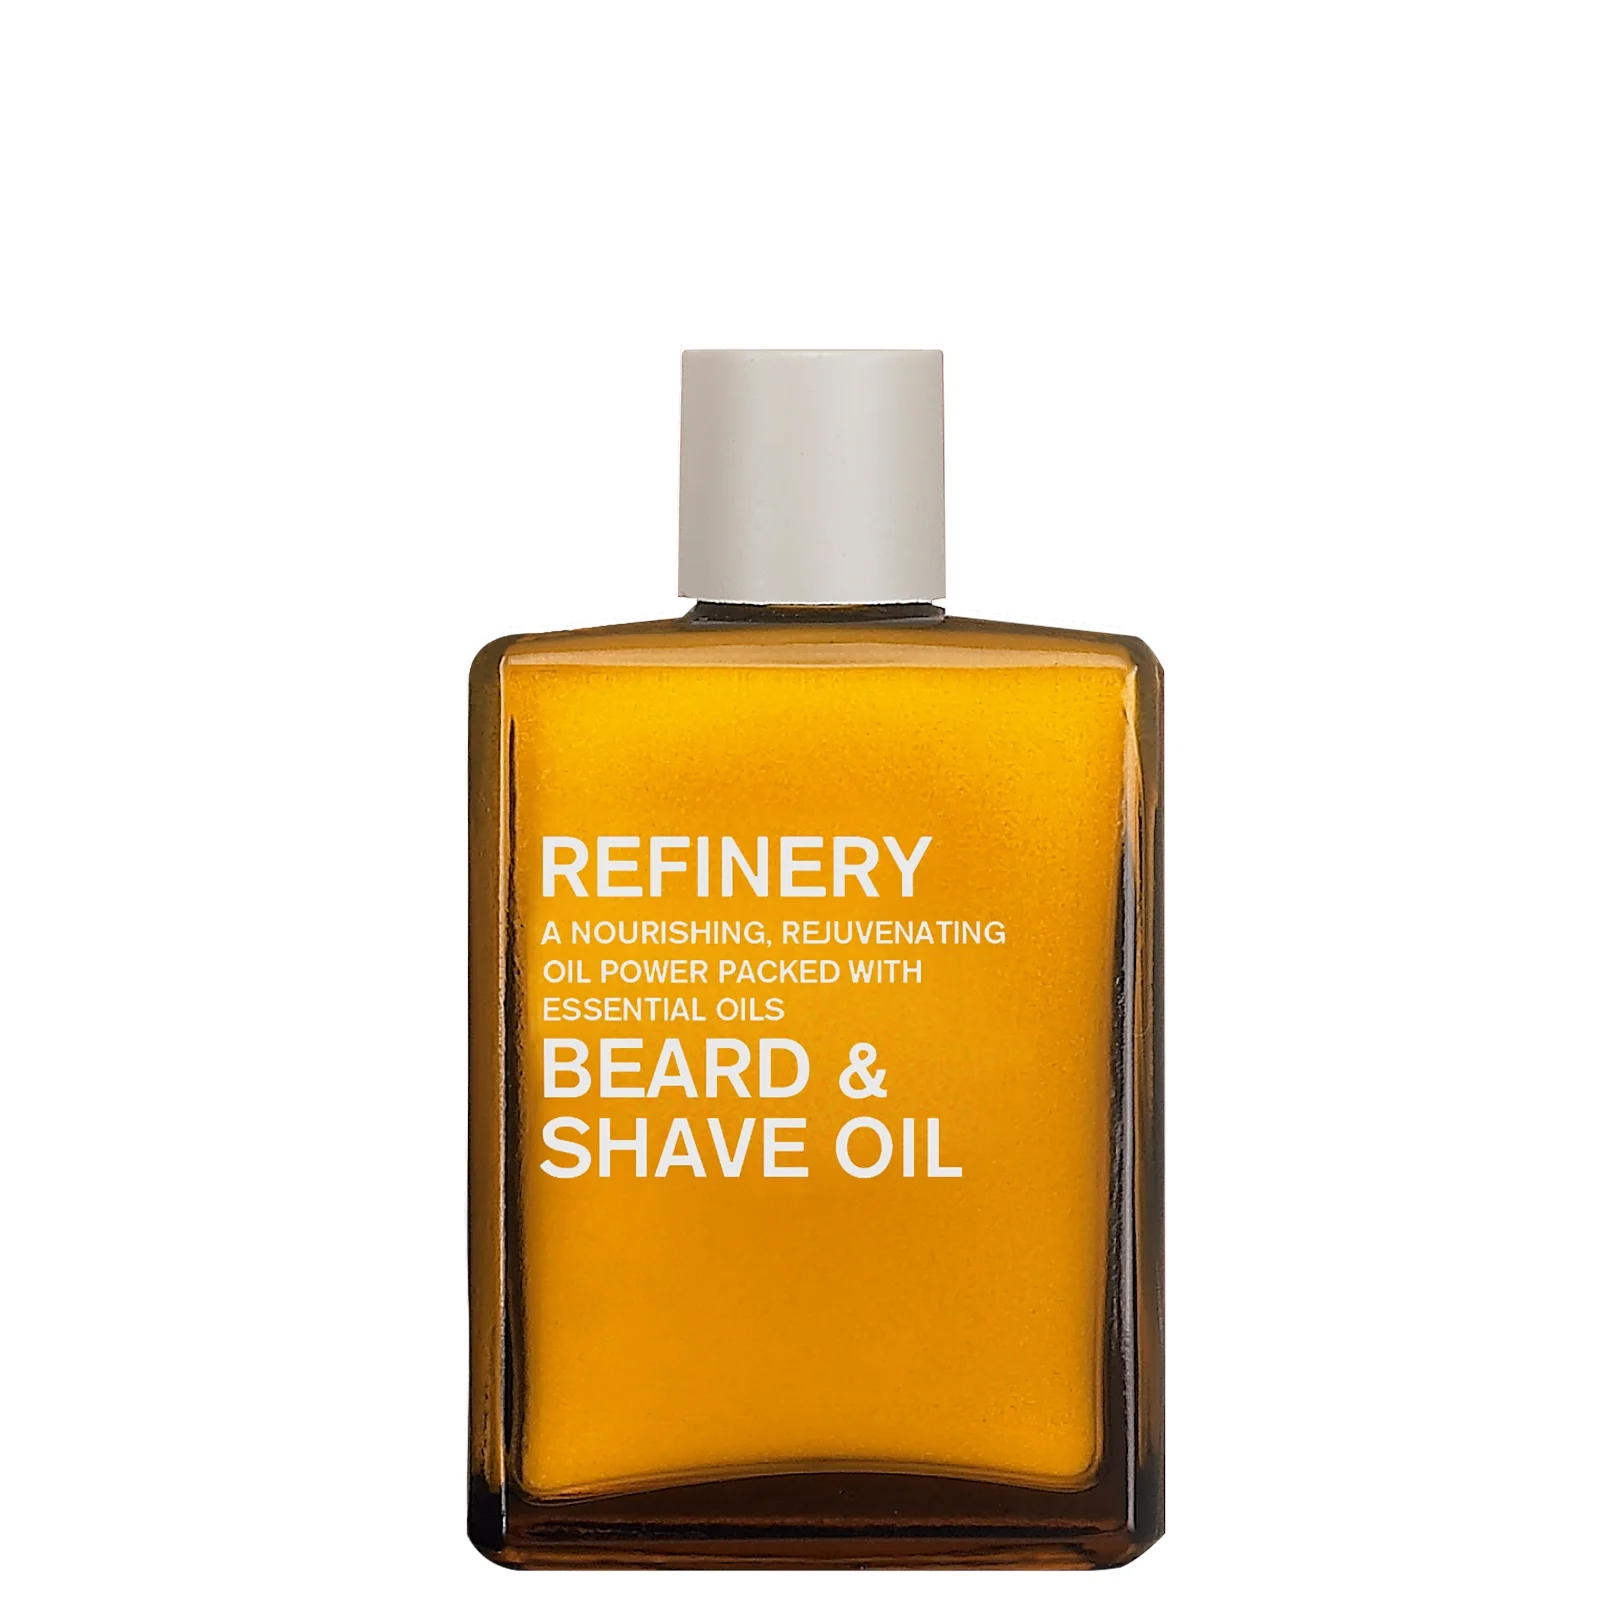 Aromatherapy Associates The Refinery Shave Oil 30ml Image 1